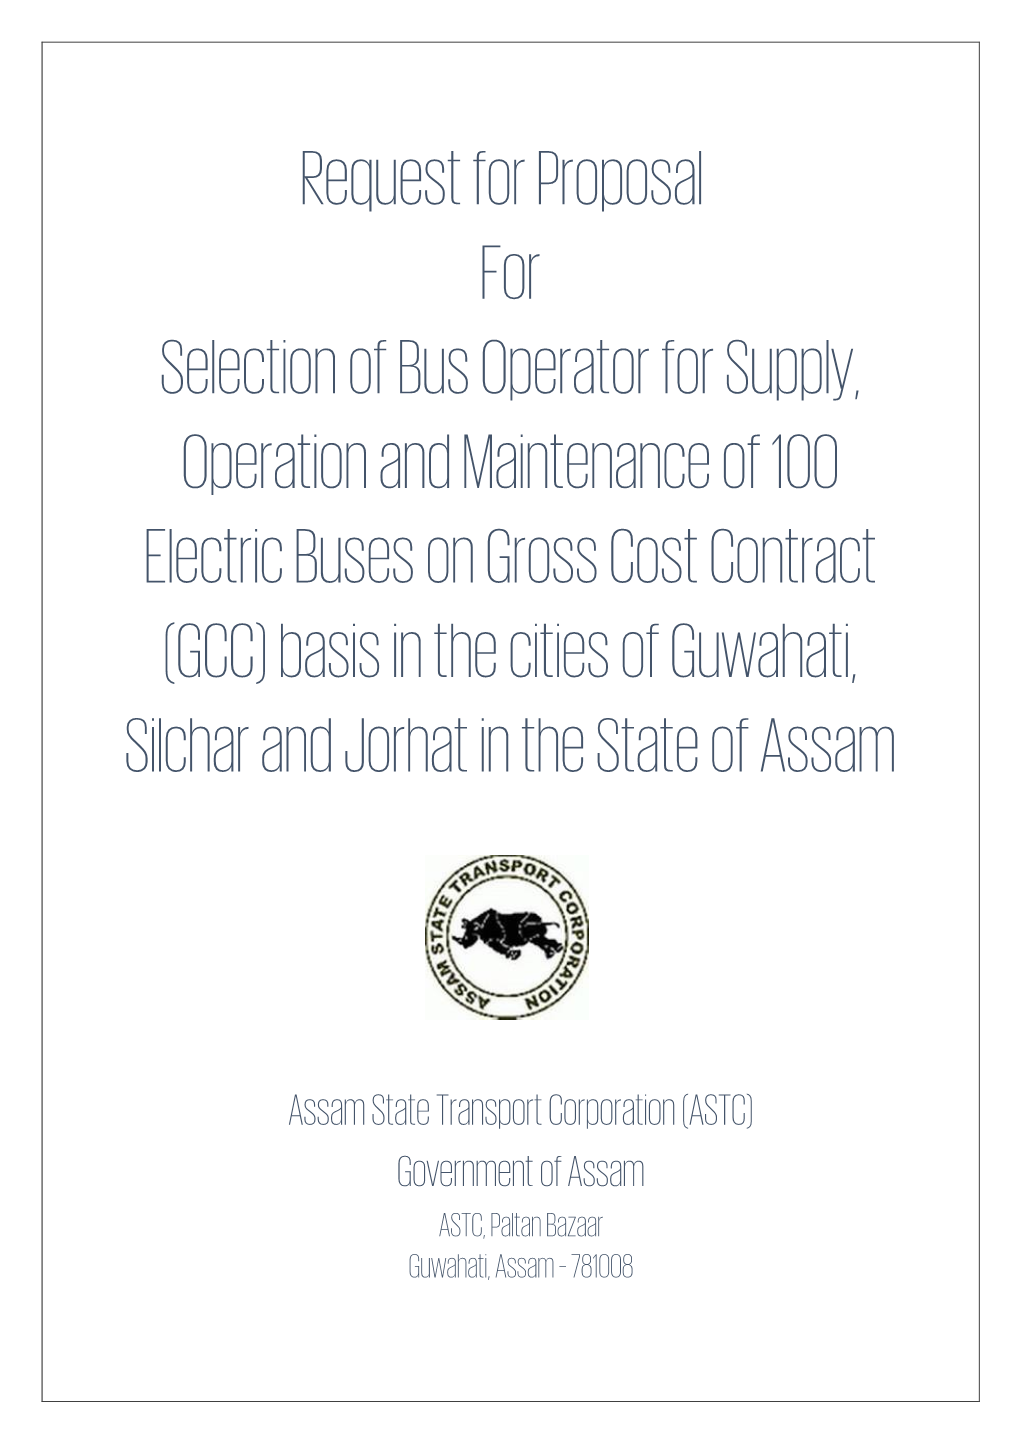 Request for Proposal for Selection of Bus Operator for Supply, Operation and Maintenance of 100 Electric Buses on Gross Cost